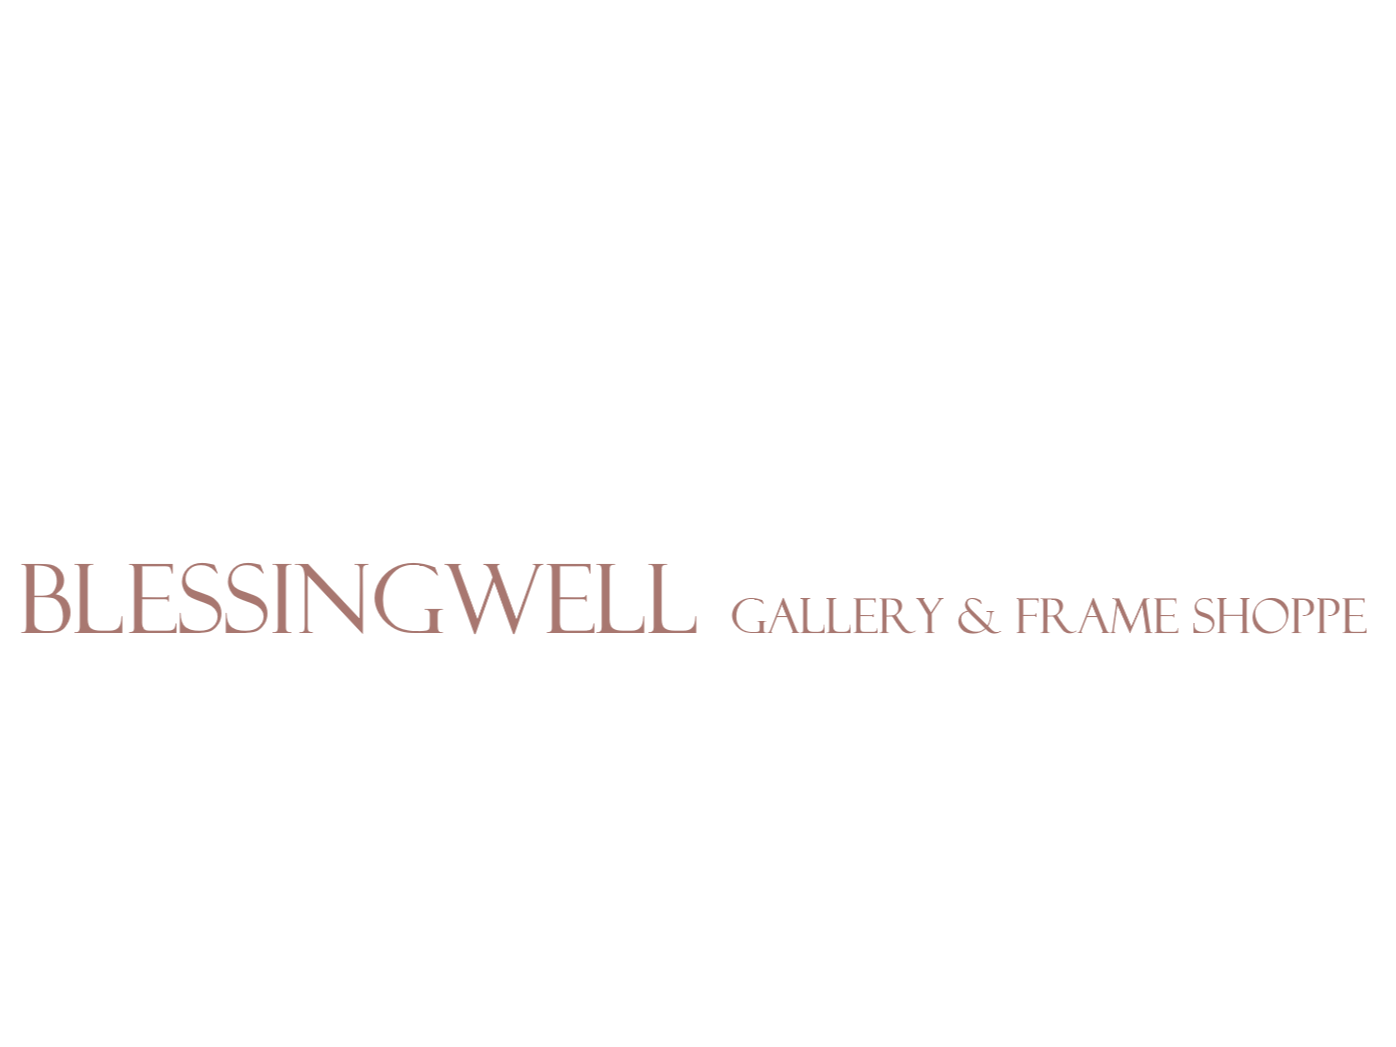 BlessingWell Gallery and Frame Shoppe logo